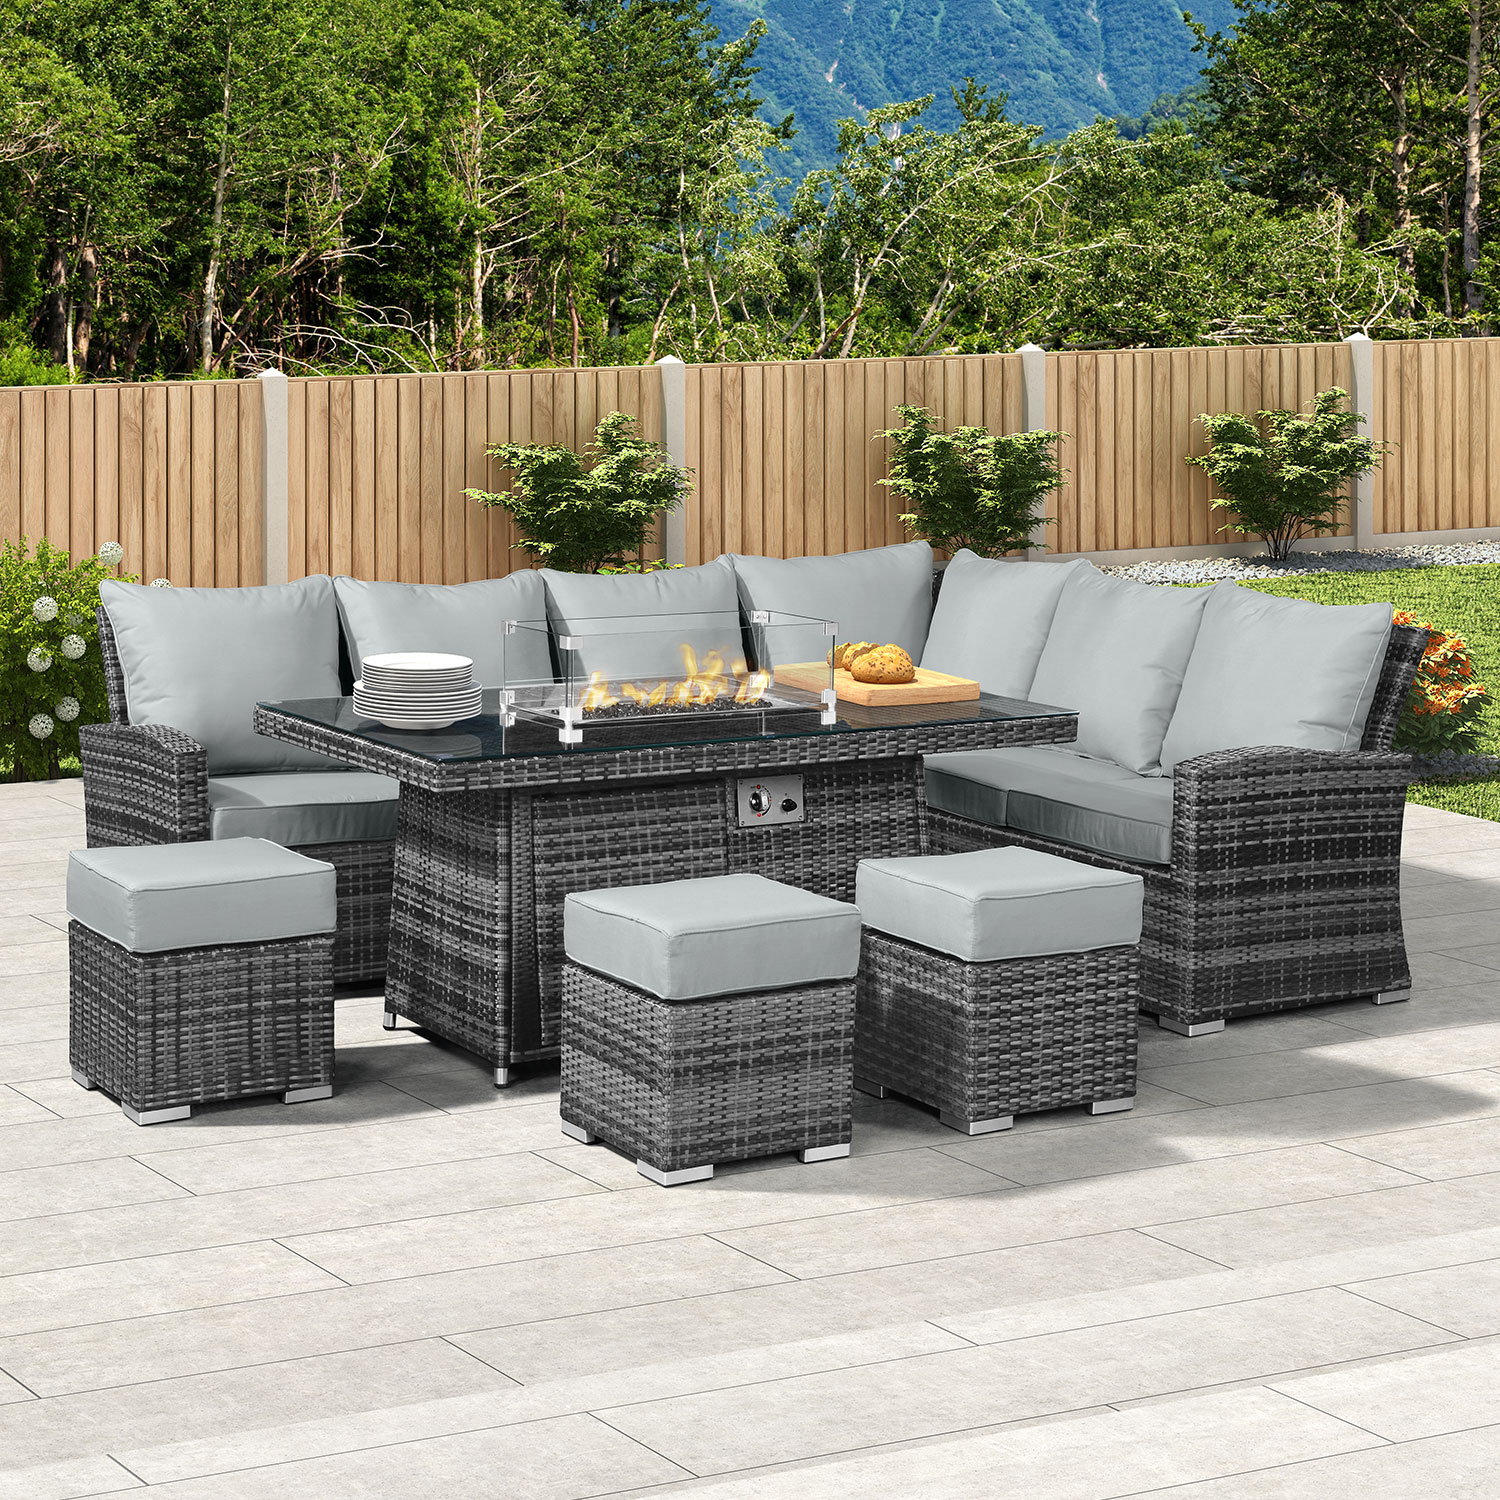 Hand Rattan Corner Sofa Dining Set, Outdoor Dining With Fire Pit